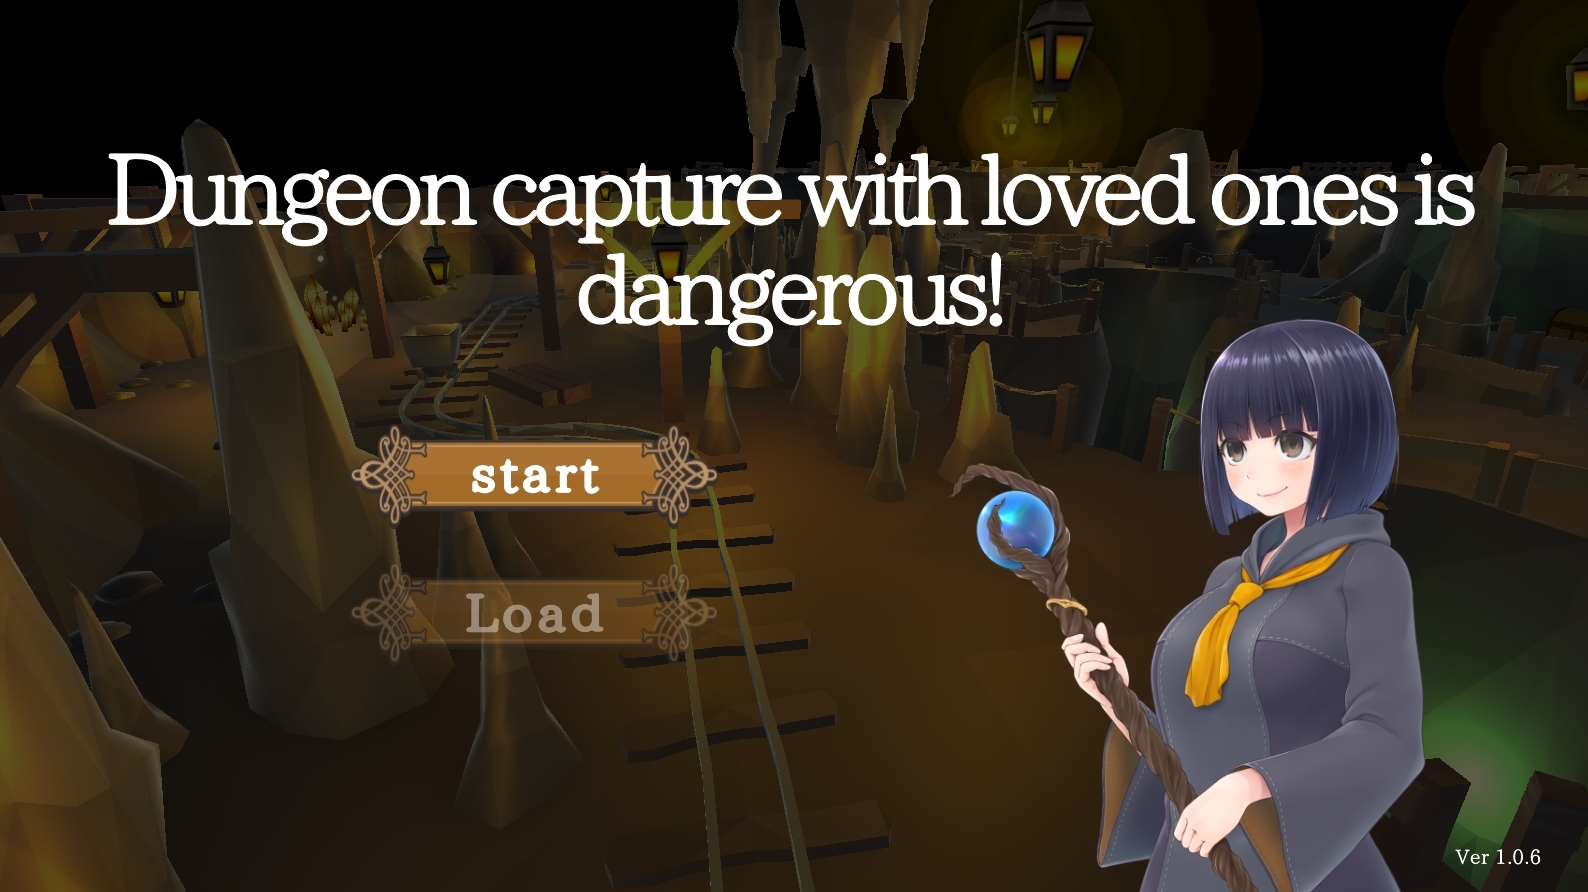 Dungeon capture with loved ones is dangerous! main image